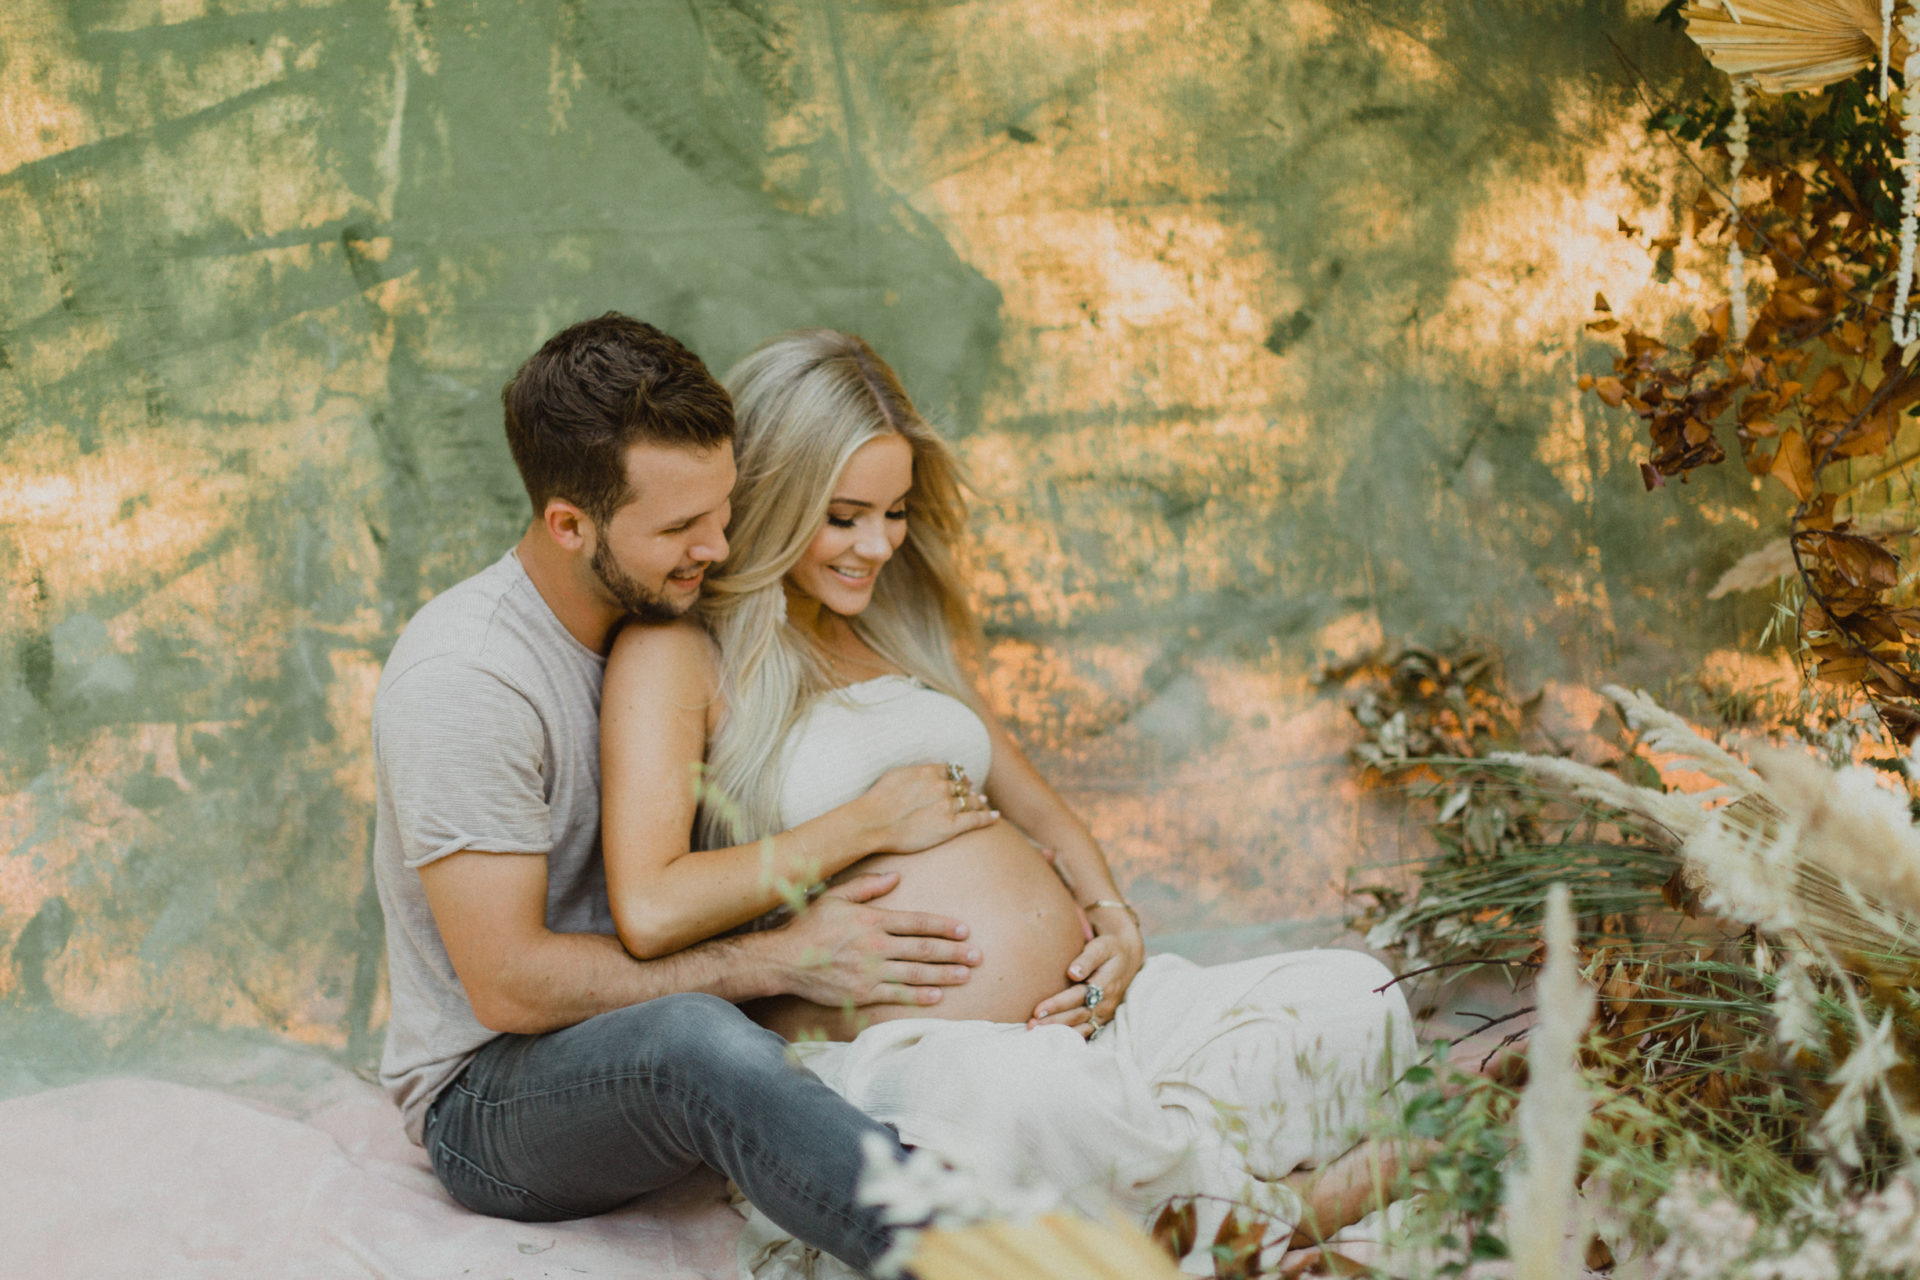 his and hers Maternity shoot inspiration